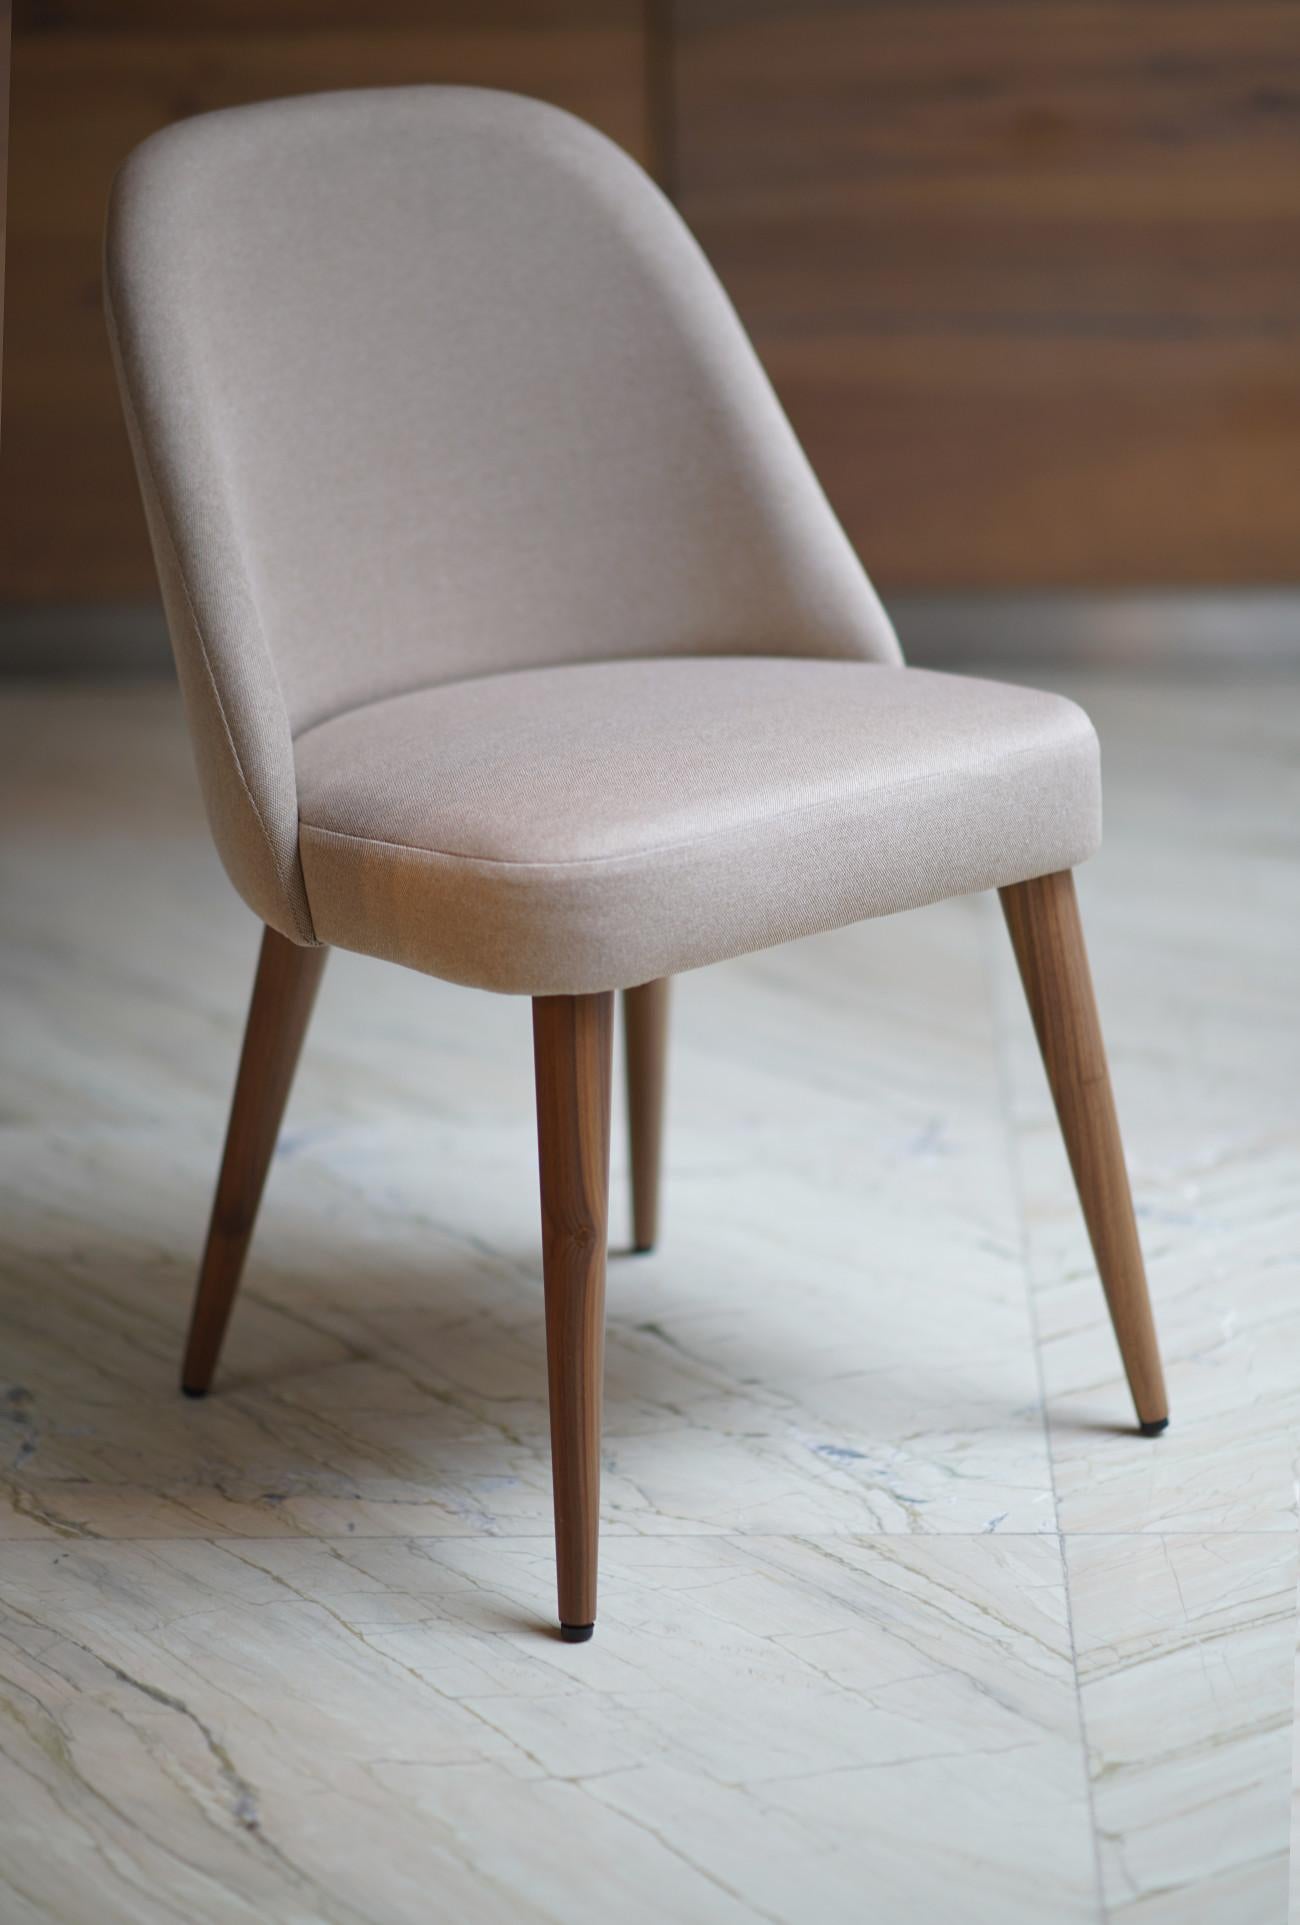 Helsinki collection. Helsinki chair: simple, elegant, comfortable. Available in oak and walnut base or in custom materials, may be upholstered with variety of fabrics and colors.

Our clients´ favorite collection is based on a piece that is as